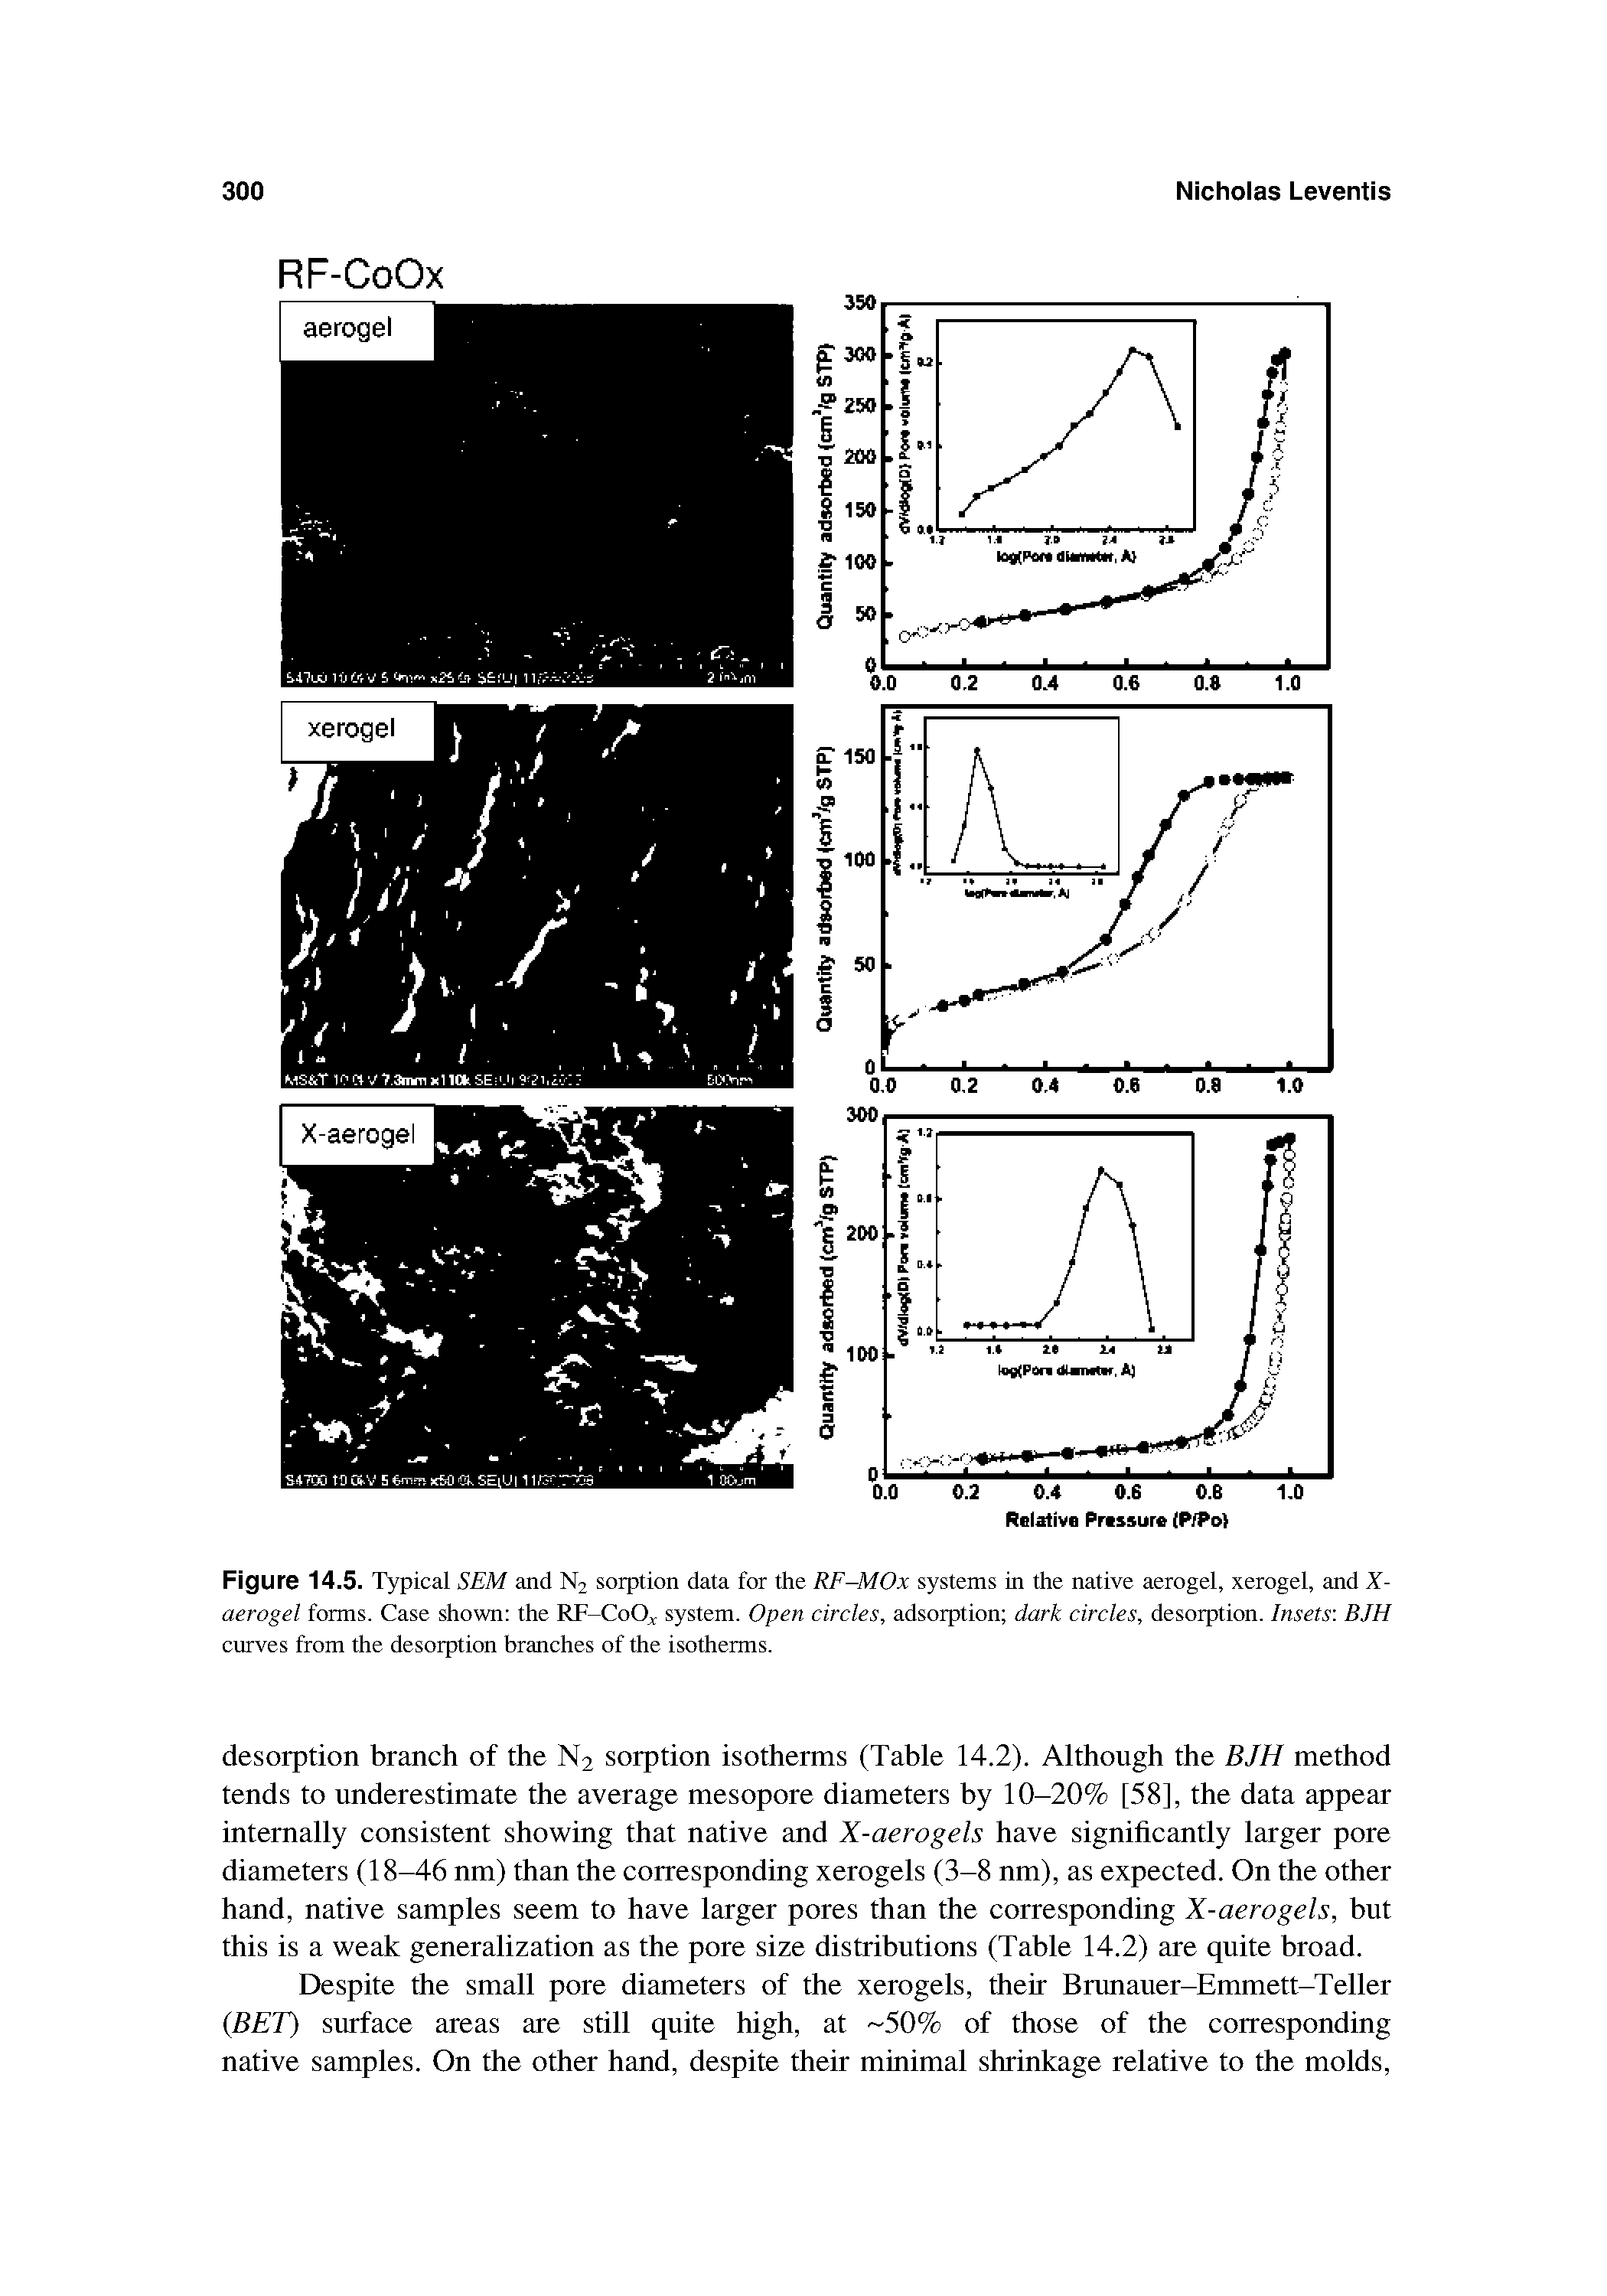 Figure 14.5. Typical SEM and N2 sorption data for the RF-MOx systems in the native aerogel, xerogel, and X-aerogel forms. Case shown the RF-CoO system. Open circles, adsorption dark circles, desorption. Insets BJH curves from the desorption branches of the isotherms.